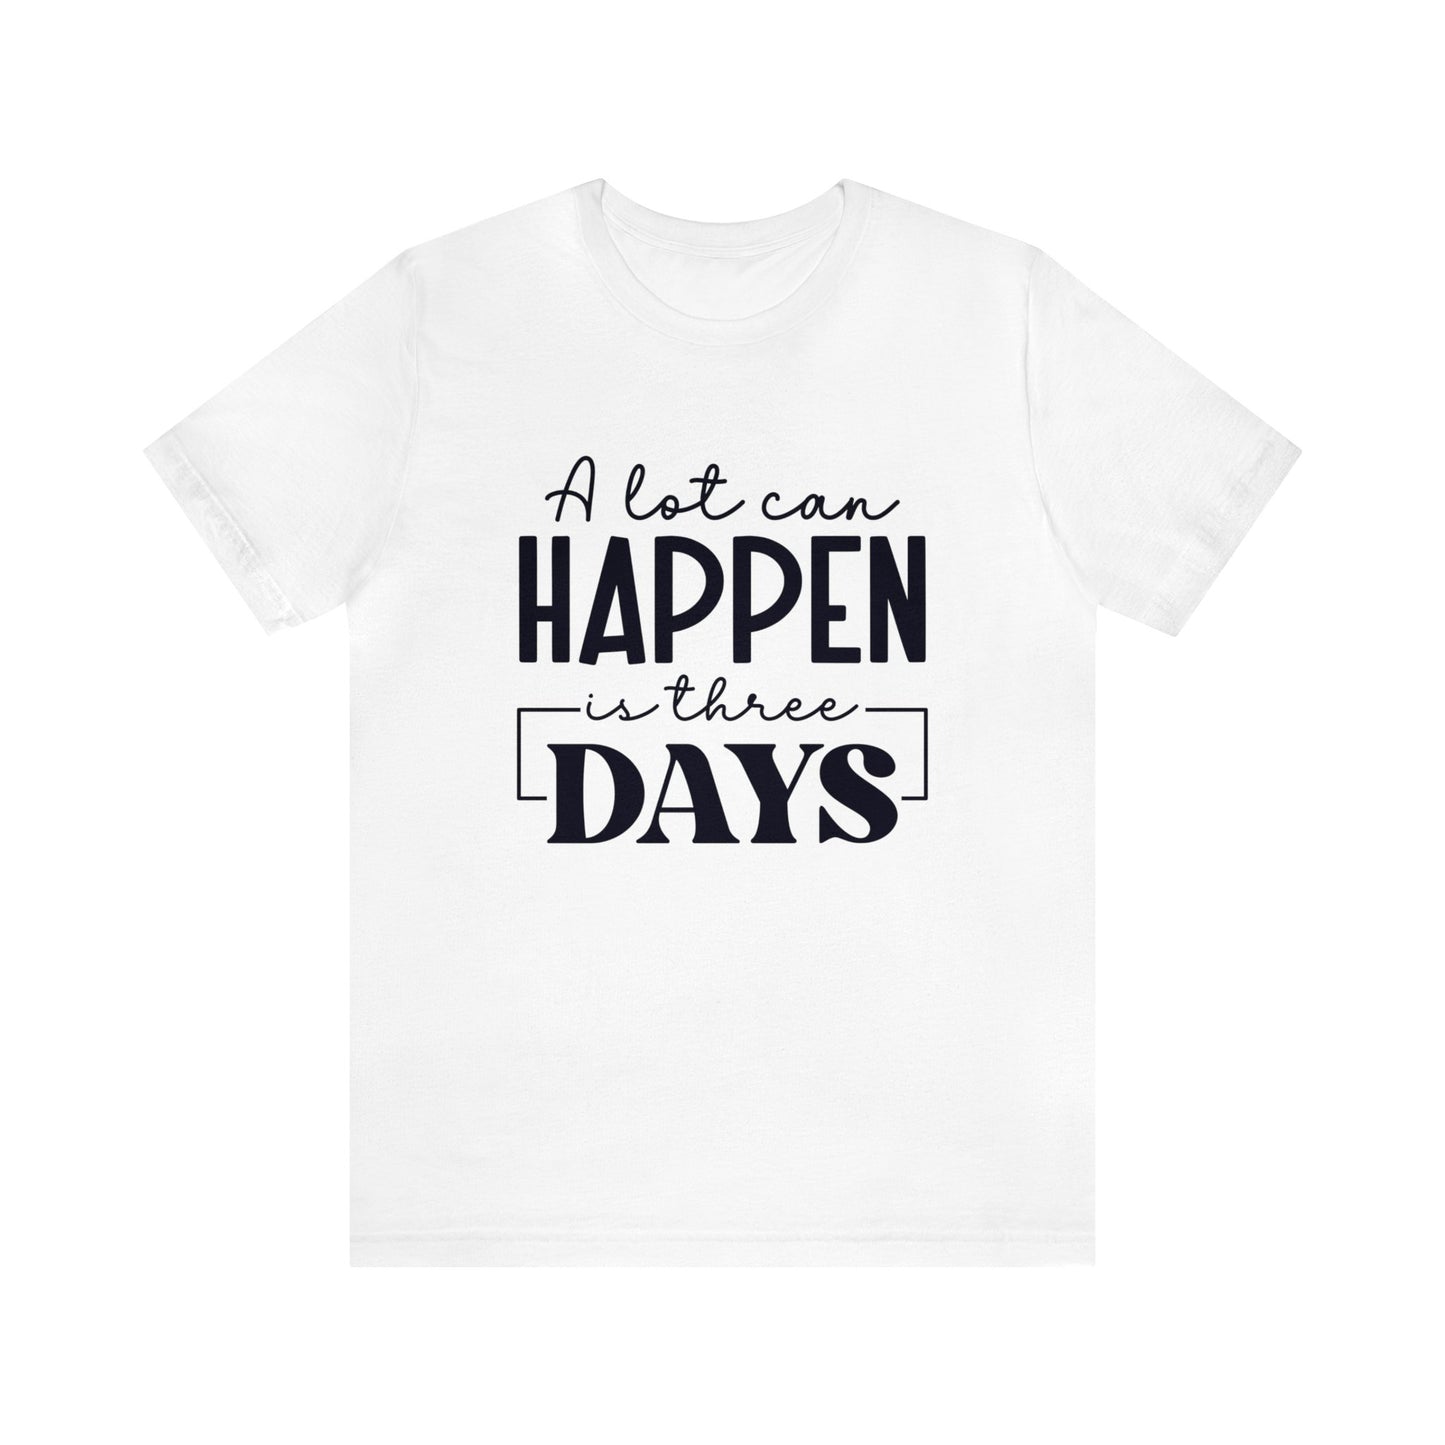 A lot can happen in 3 days Women's Short Sleeve Tee